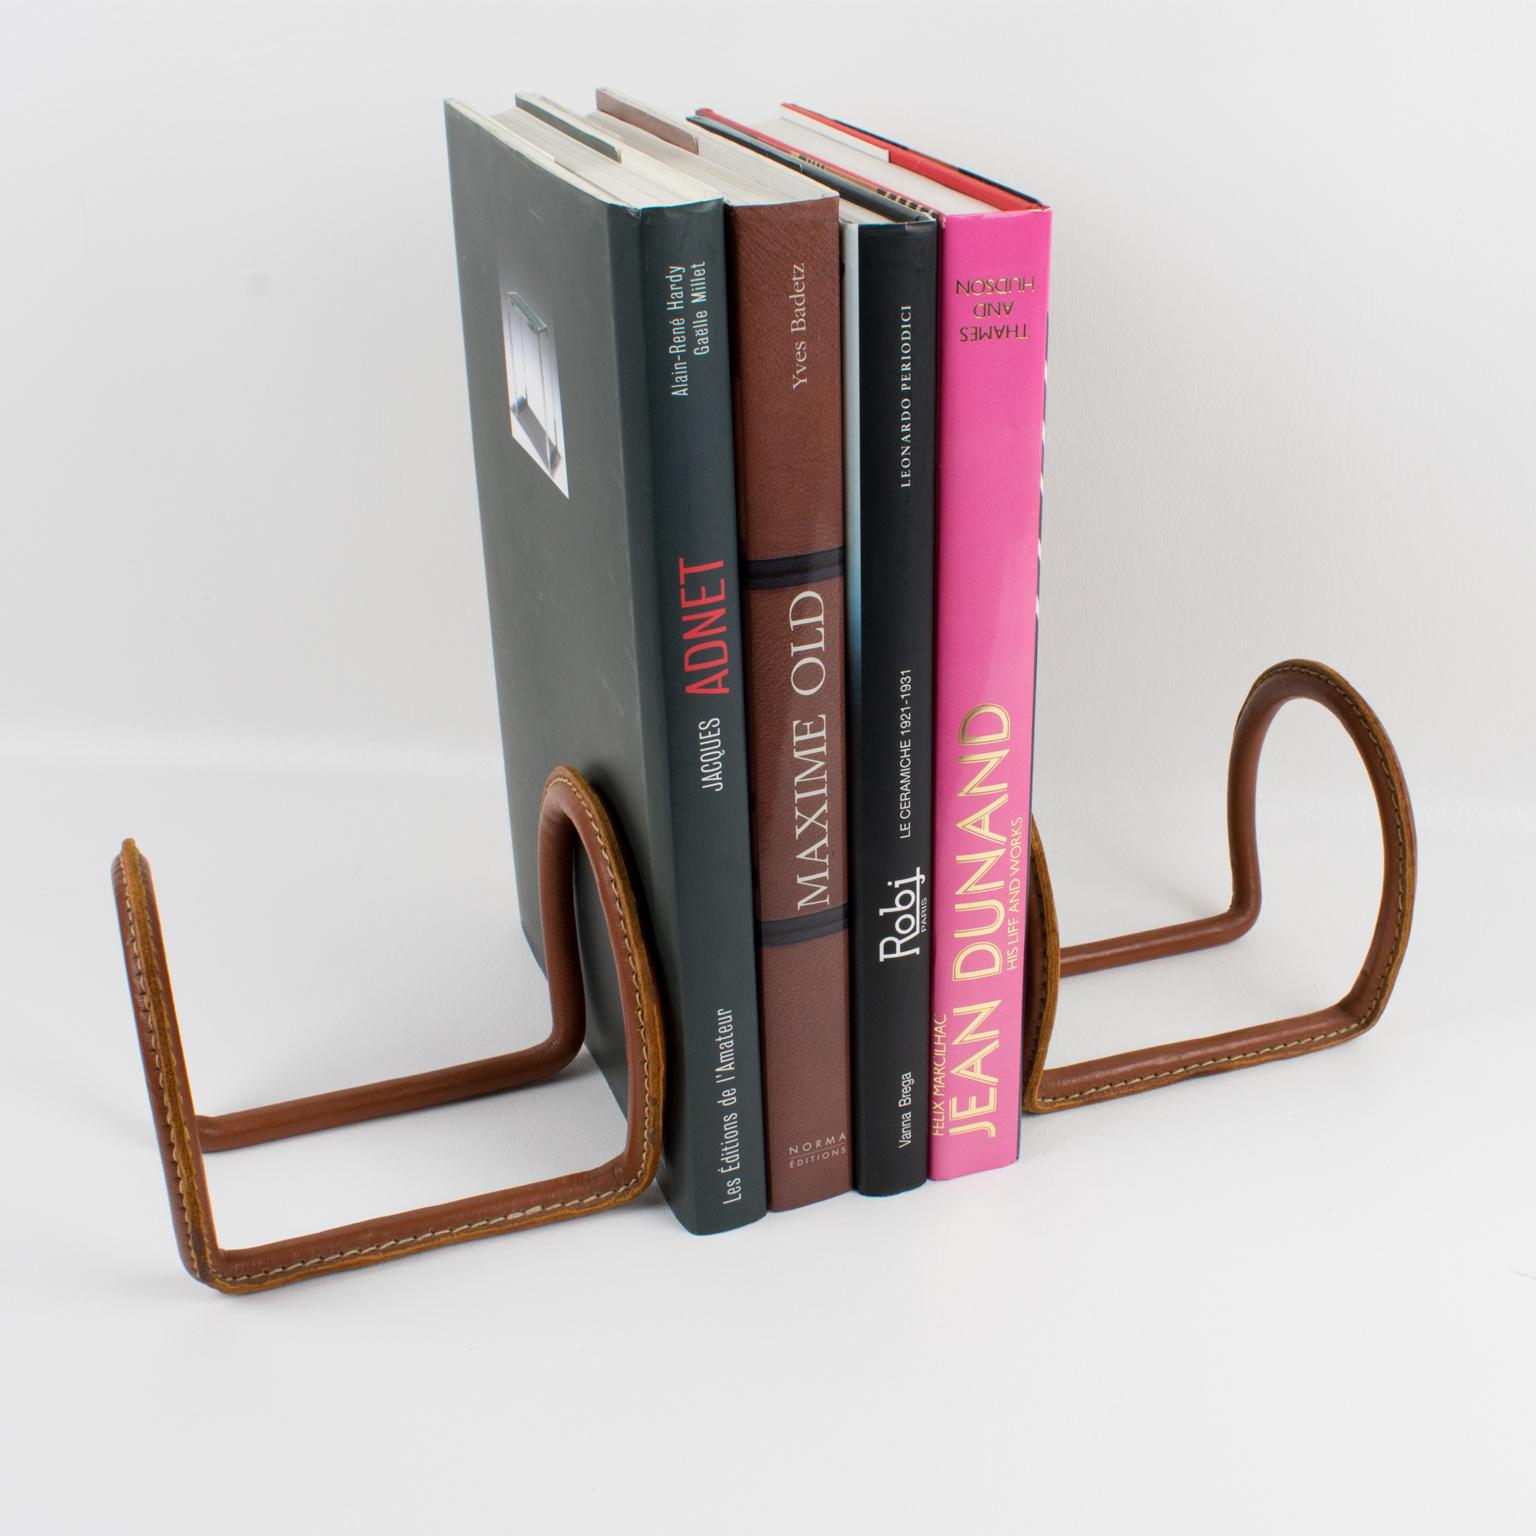 Lovely leather bookends designed by French designer Jacques Adnet (1901-1984). Double horseshoe shape with Adnet signature contrast hand-stitched cognac leather.
Measurements: 5.94 in. wide (15 cm) x 5.13 in. deep (13 cm) x 5.13 in. high (13